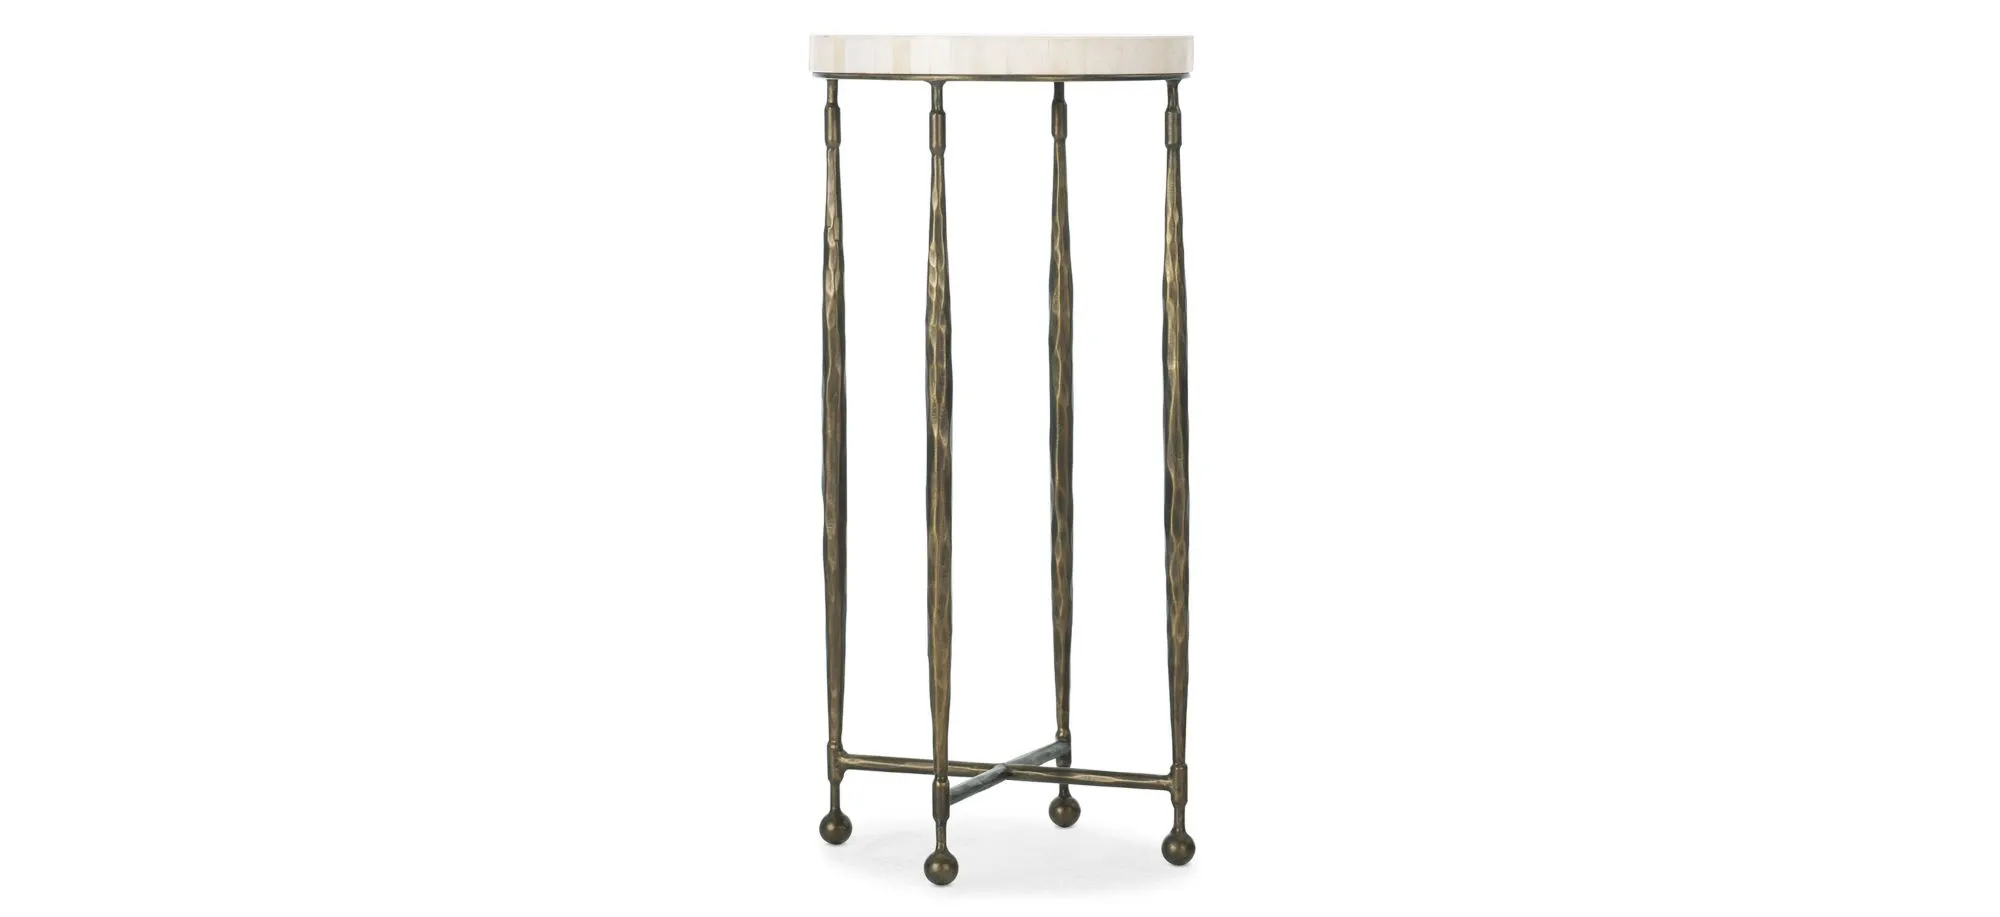 Commerce & Market Martini Table in Bronze metal base with natural bone inlay top by Hooker Furniture